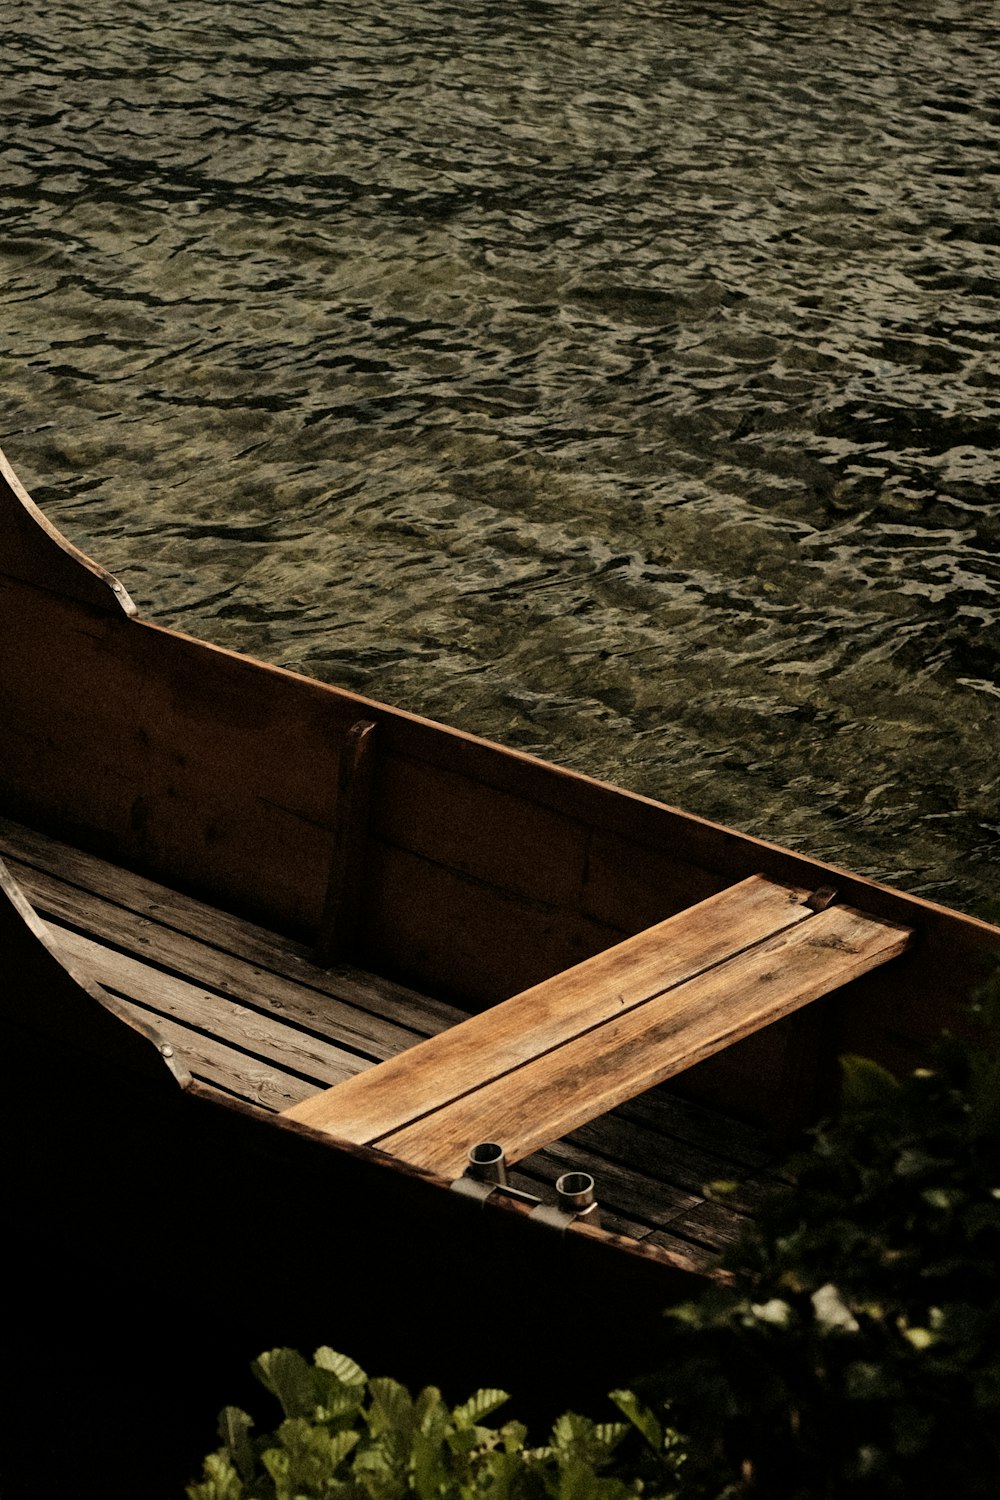 a small wooden boat floating on top of a body of water